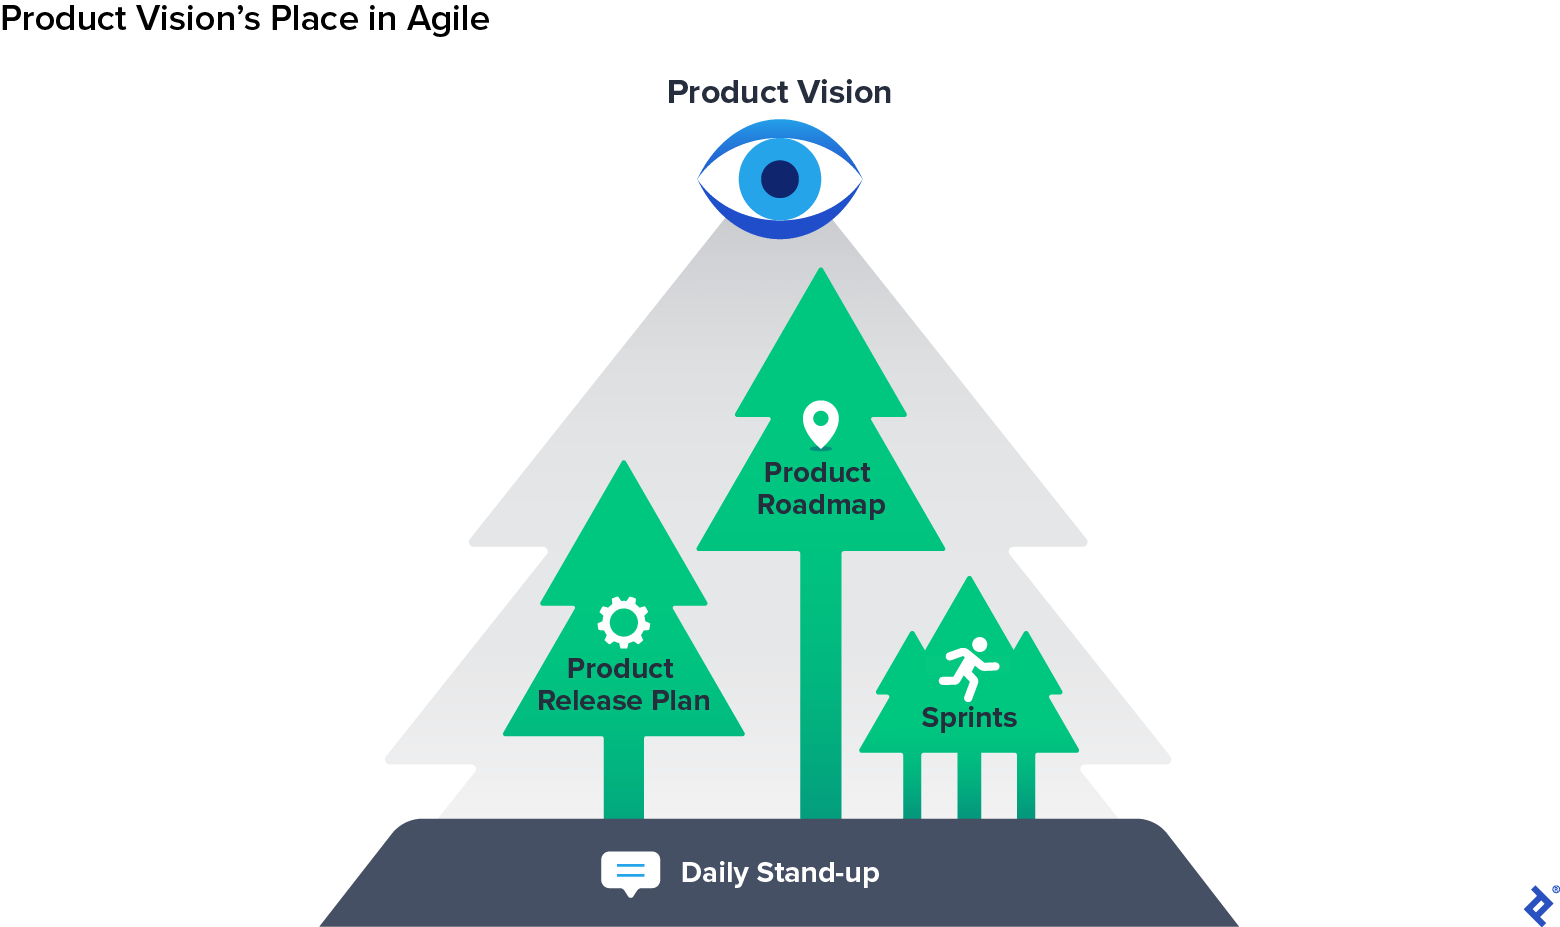 A forest labeled Product Vision comprising trees Labeled Sprints, Product Release Plan, and Product Roadmap, on ground labeled Daily Stand-up.